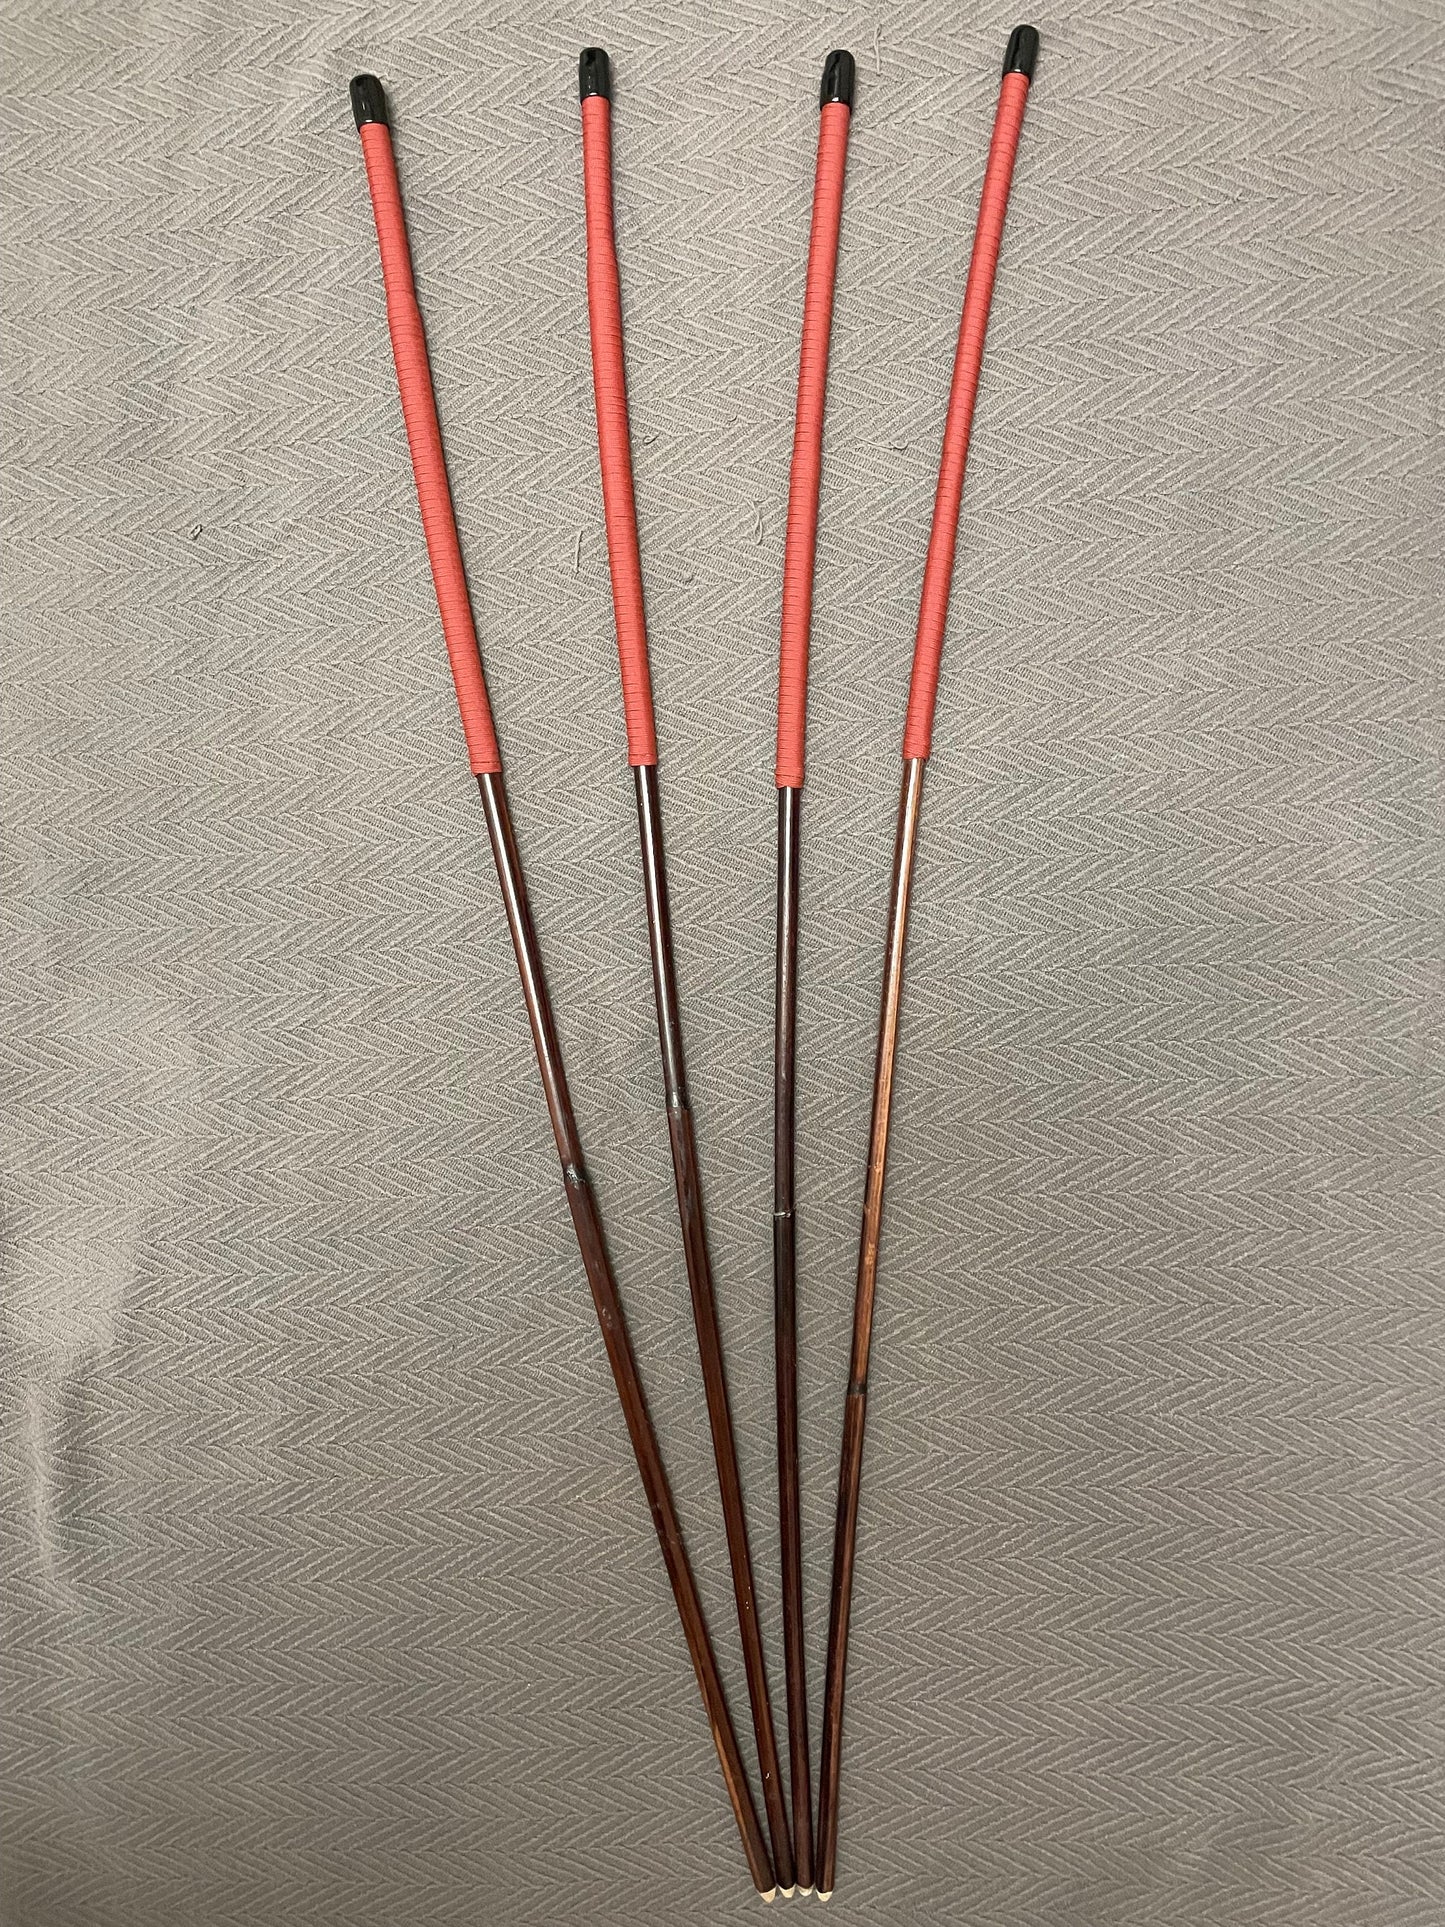 Set of 4 Smoked Dragon Canes 95 - 100 cms with Red Paracord Handles